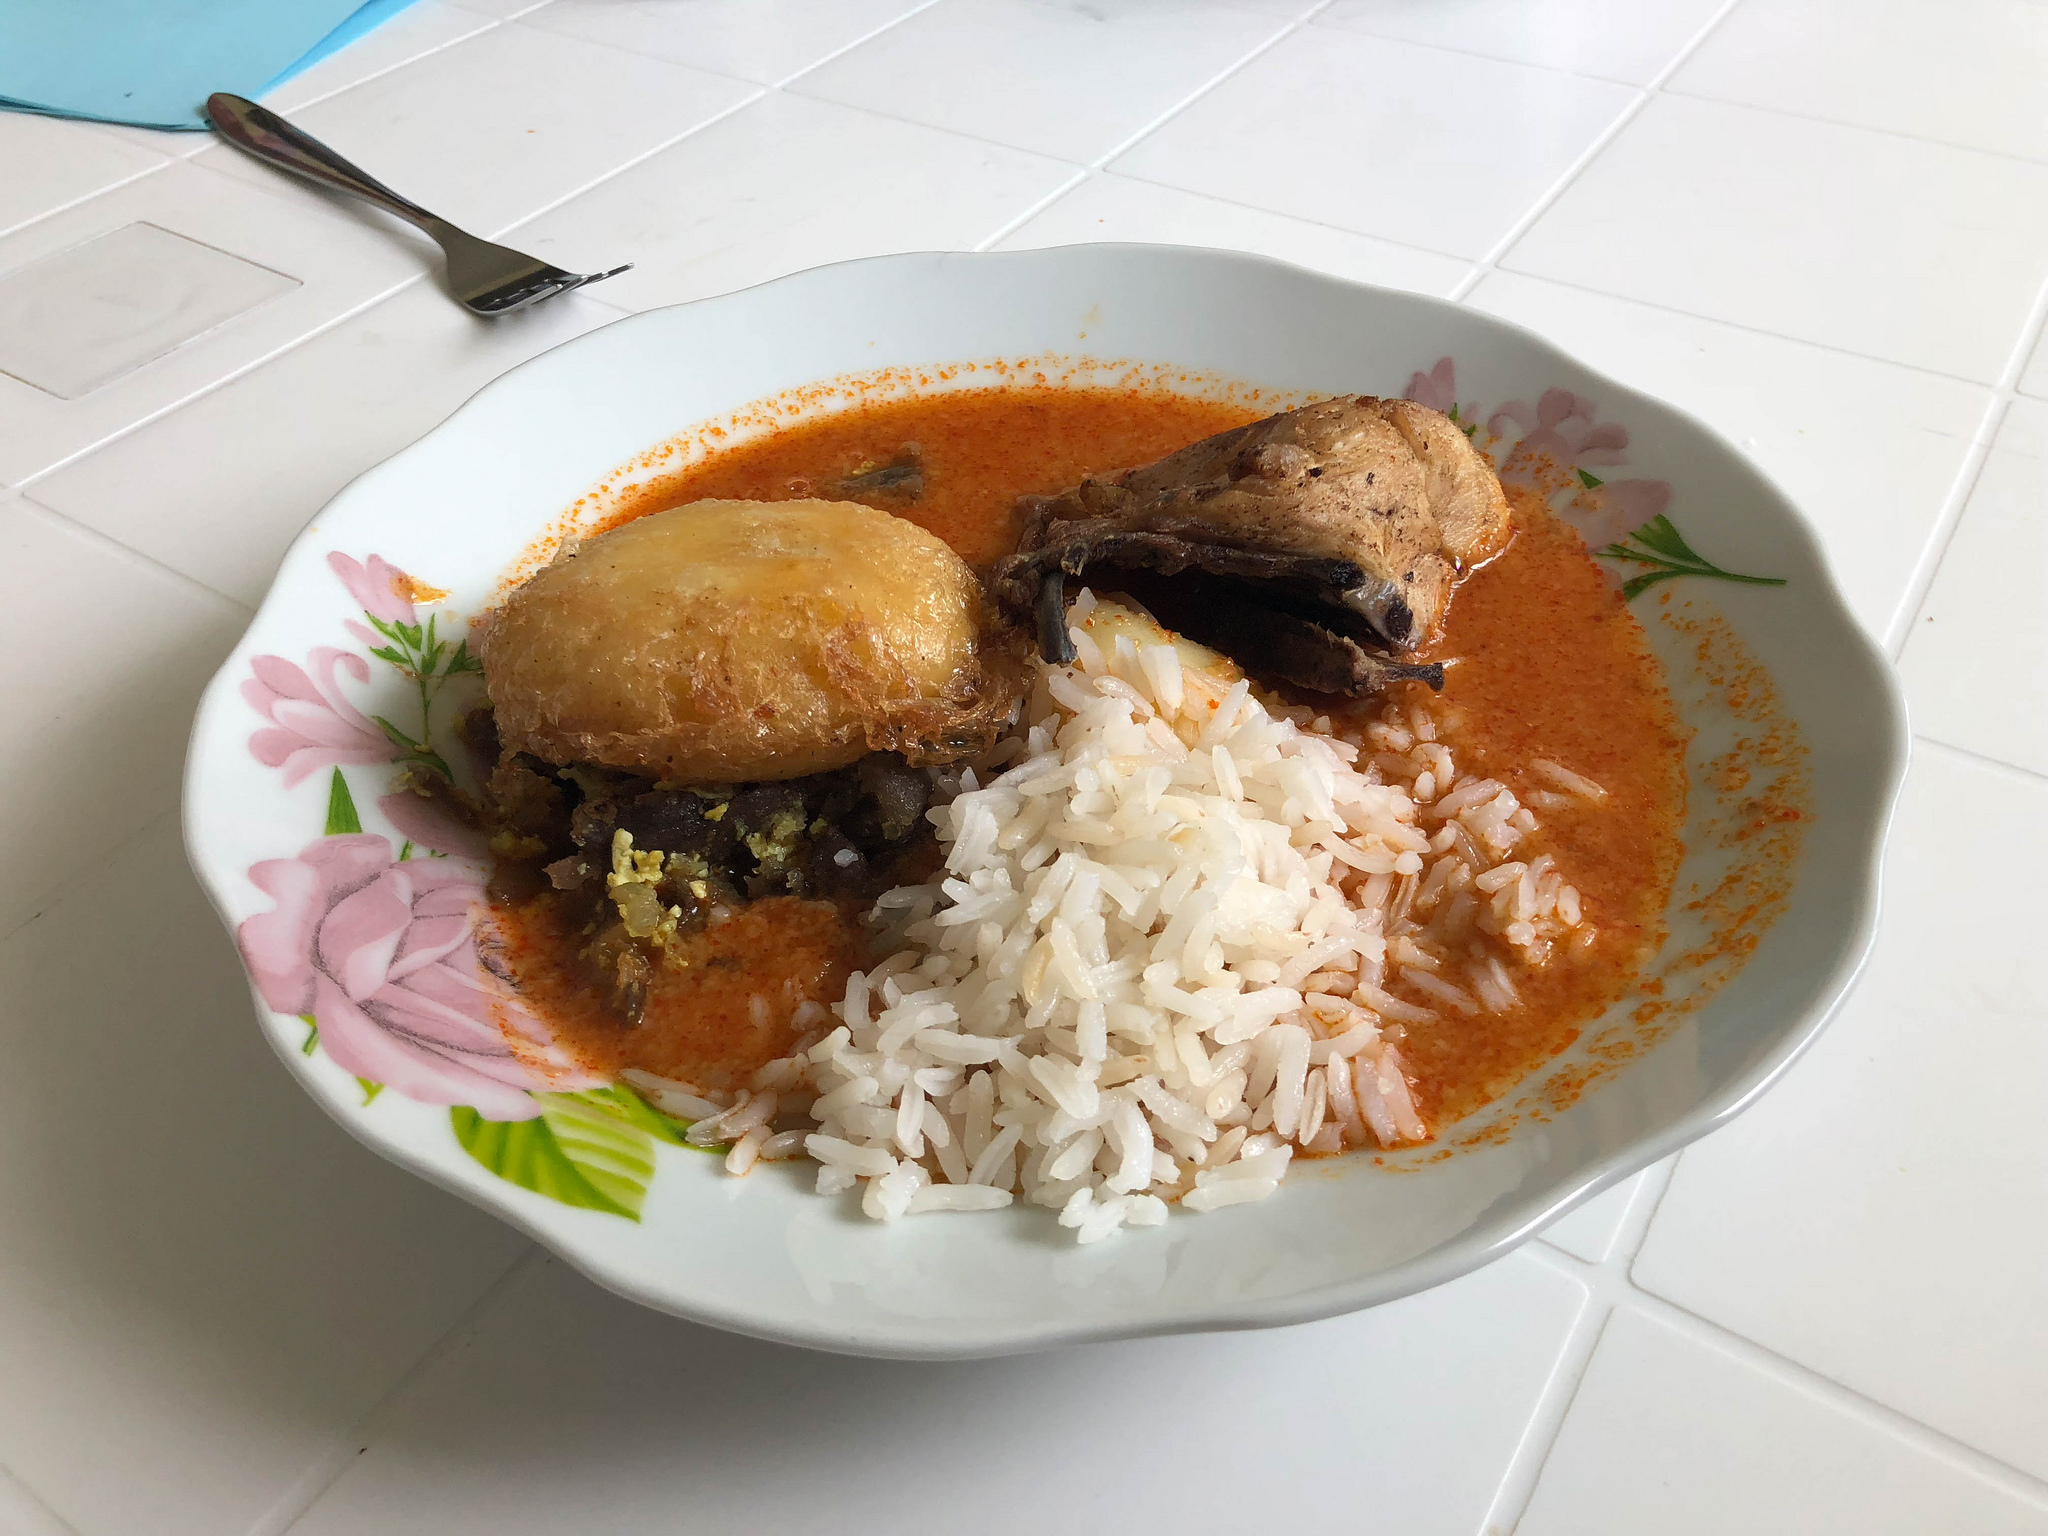   Uchuku —a regional stew featuring  chuño  (dehydrated potato), chicken, and spicy broth—served in the hospital cafeteria in Mizque during the 2018 Multi-Specialty Mission Trip. 